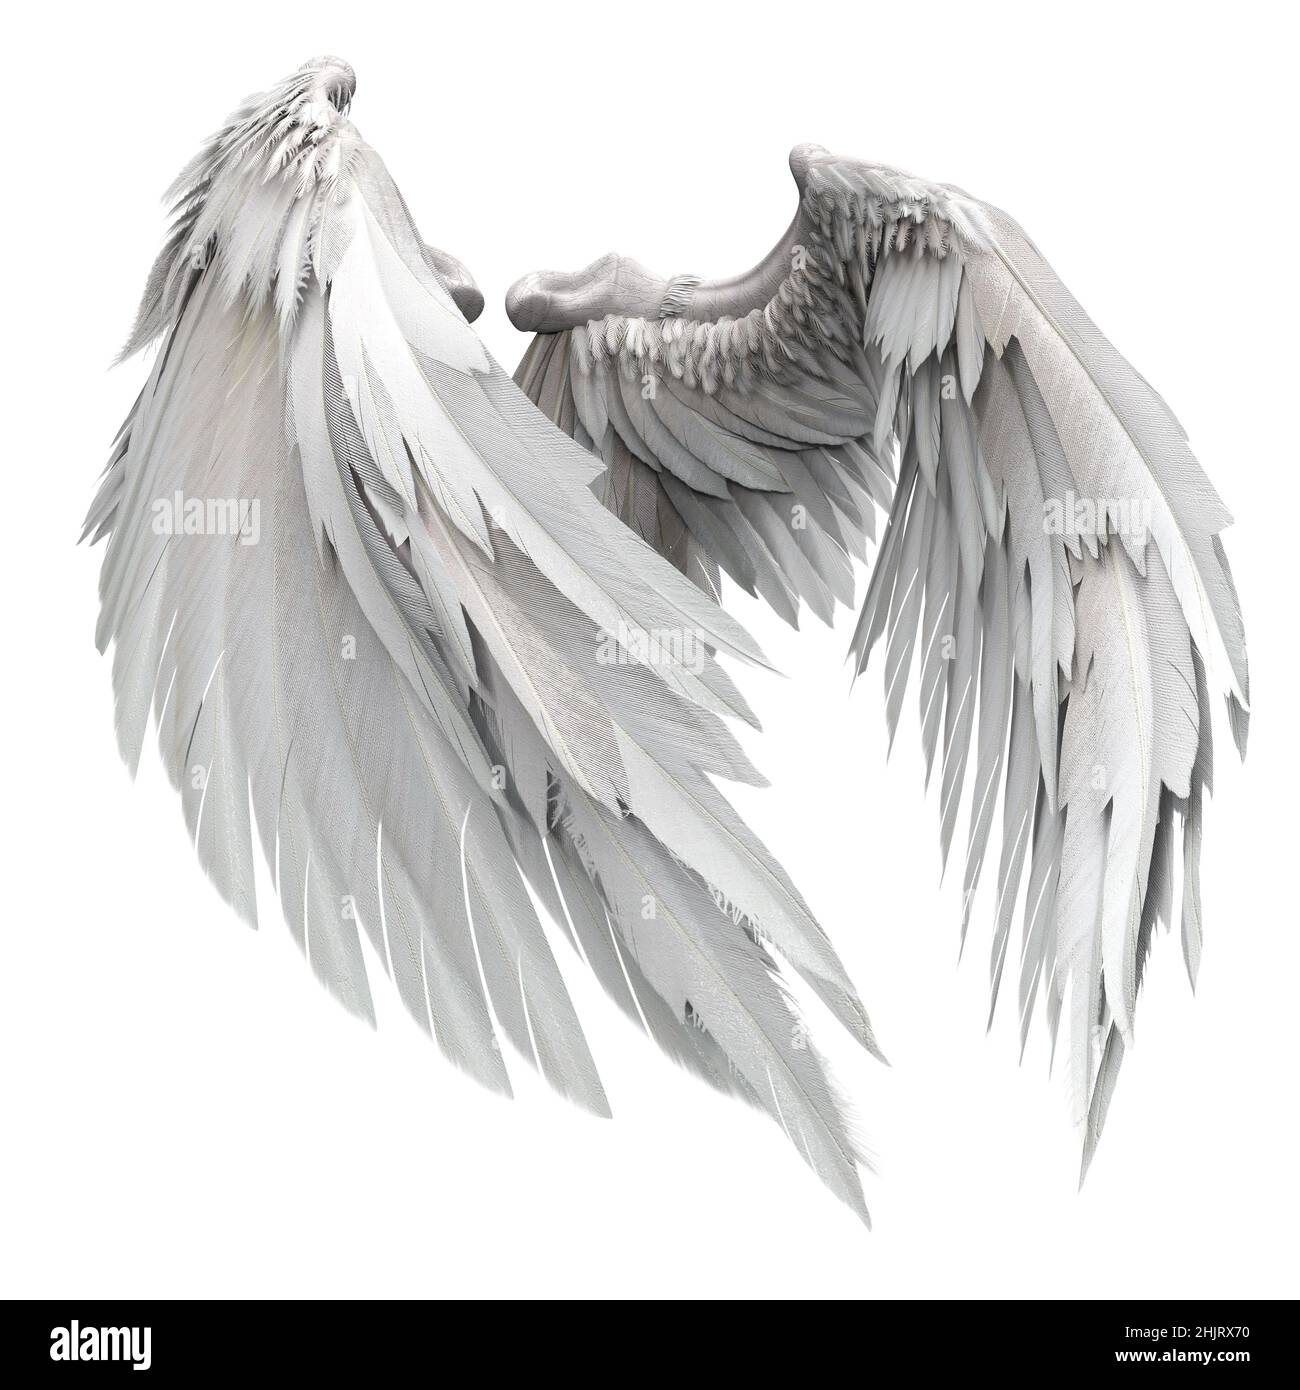 https://c8.alamy.com/comp/2HJRX70/pair-of-isolated-angel-wings-with-3d-feathers-on-white-background-3d-illustration-3d-rendering-2HJRX70.jpg